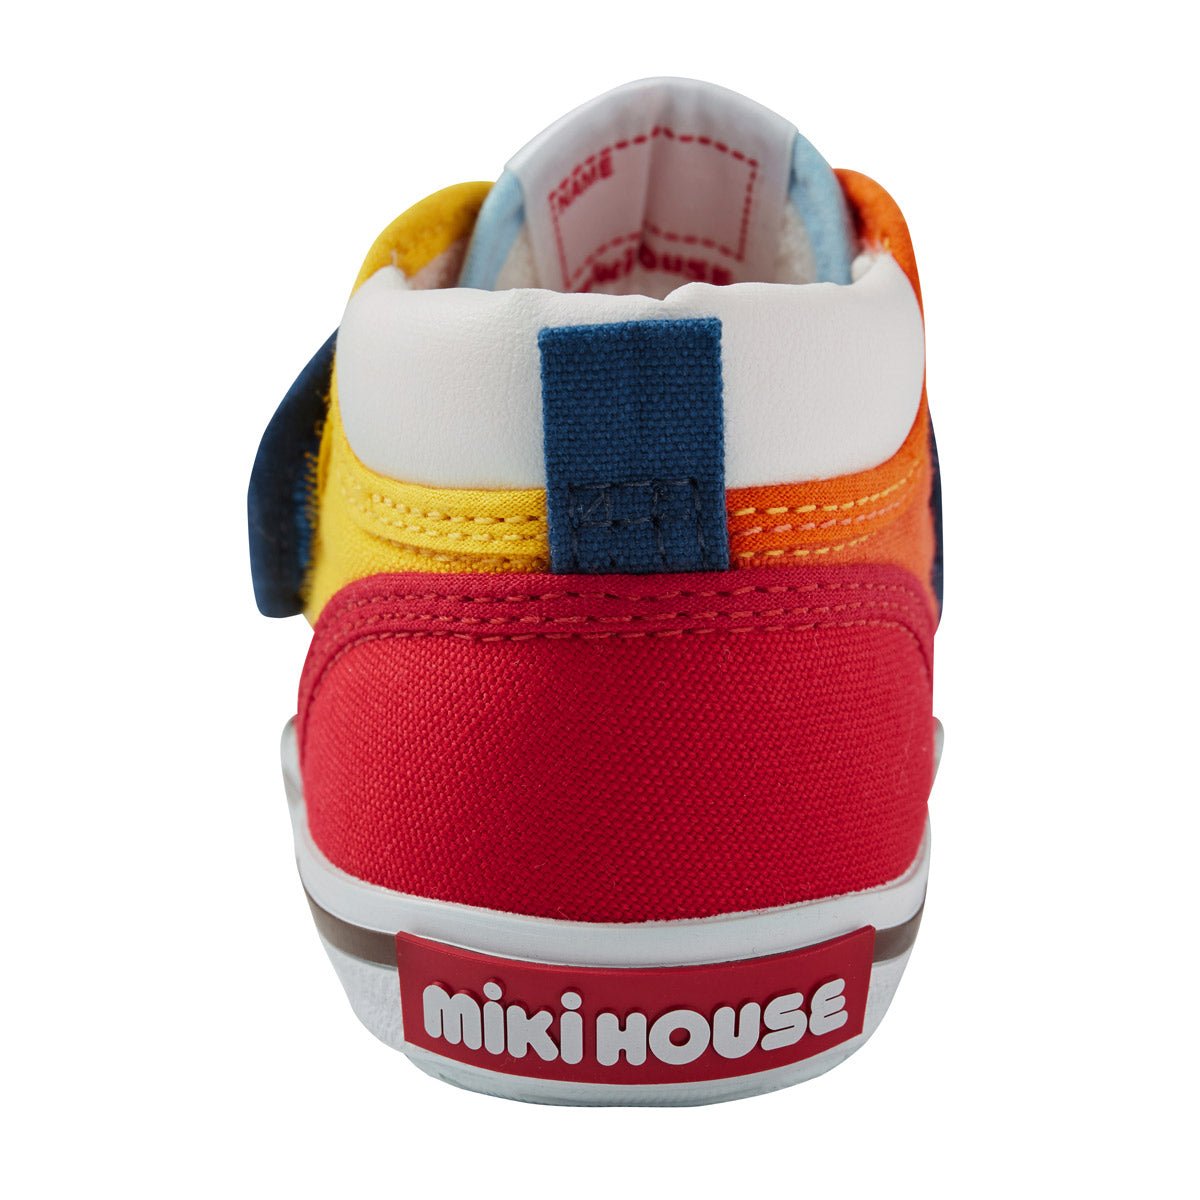 Working Cars Second Shoes - MIKI HOUSE USA